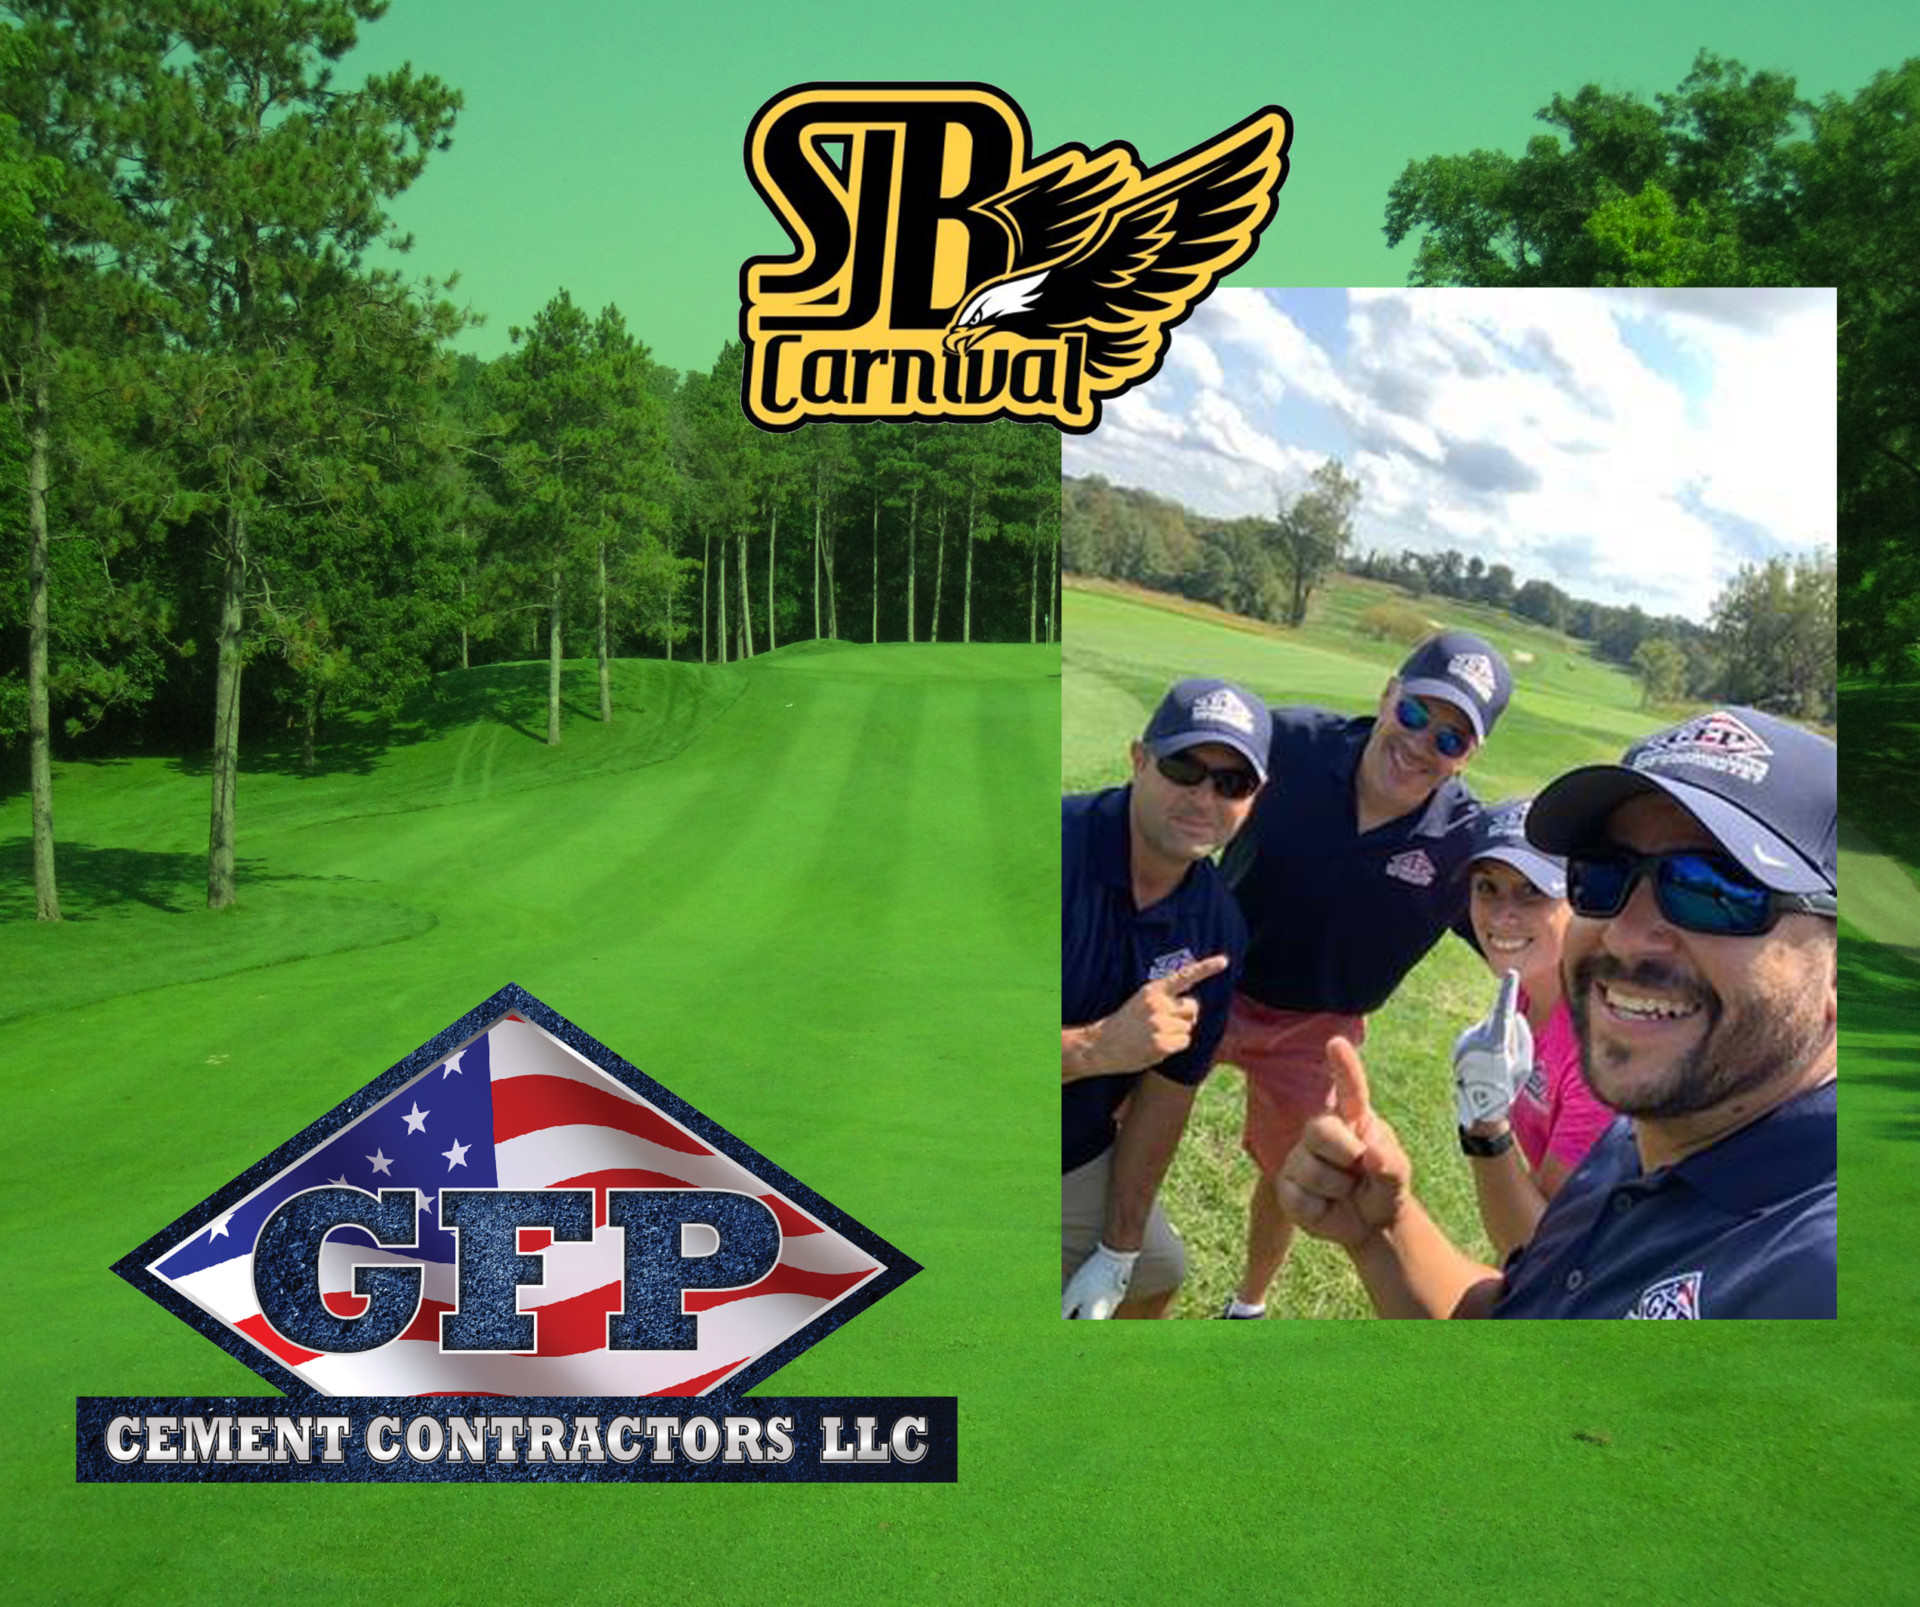 SBJ Carnival Golf Outing